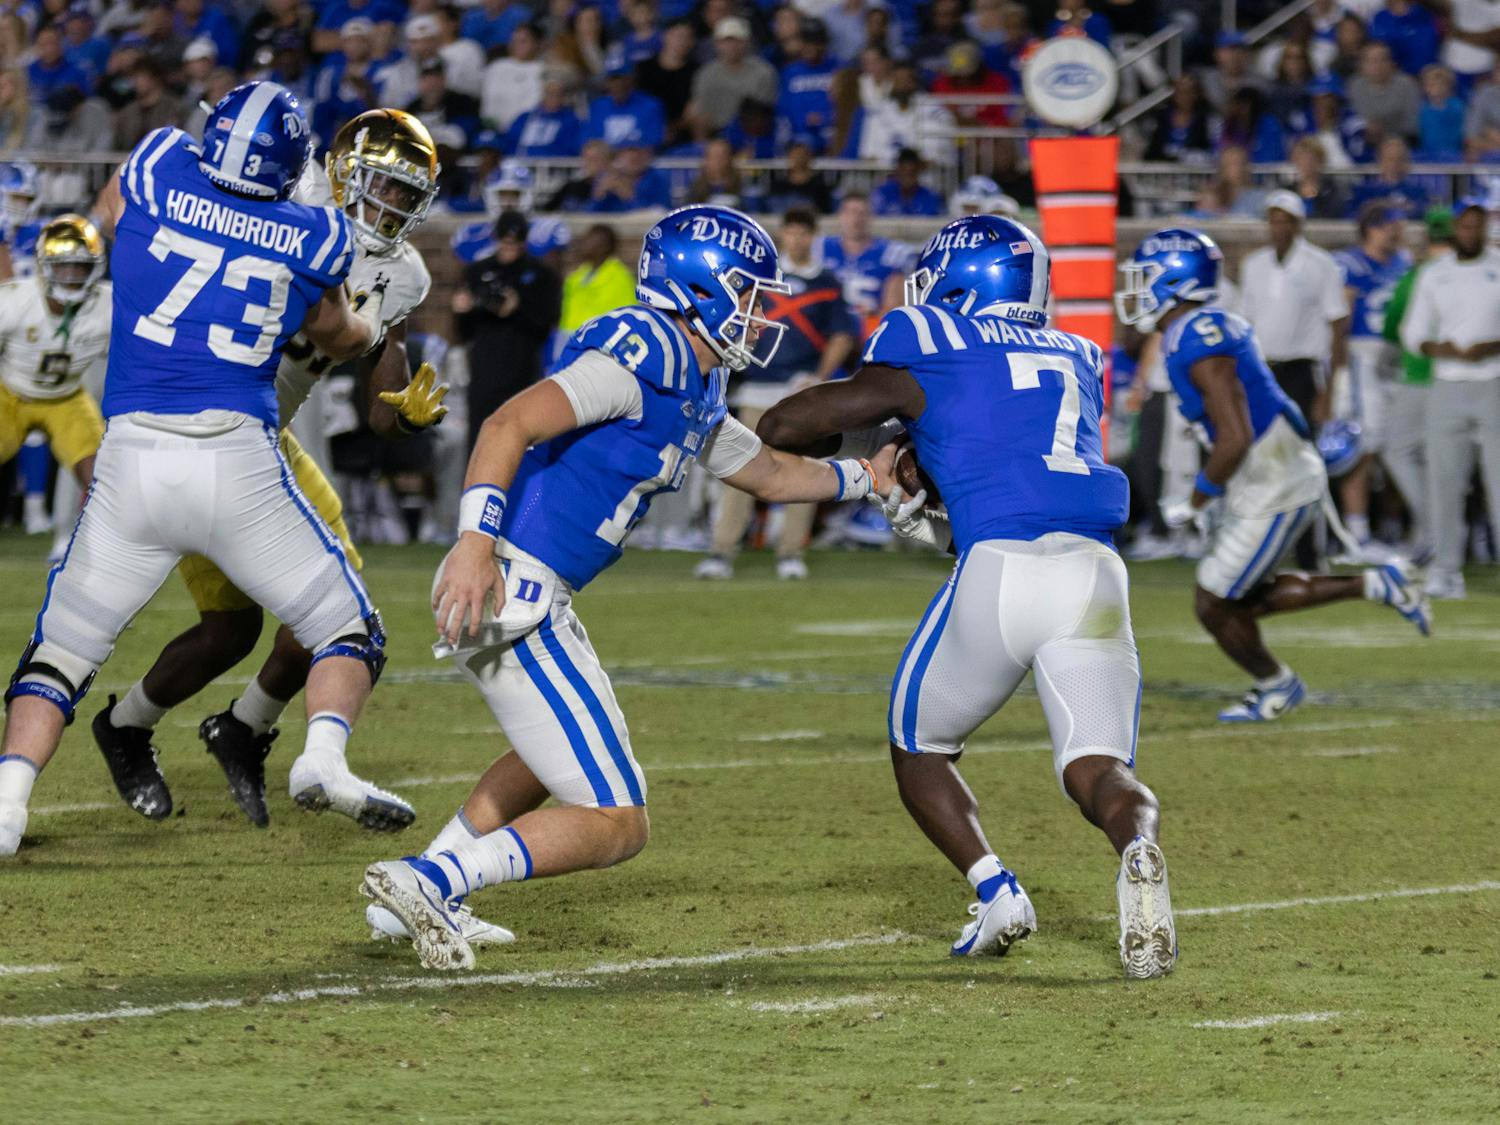 The 17th-ranked Blue Devils will take on N.C. State in their next matchup.